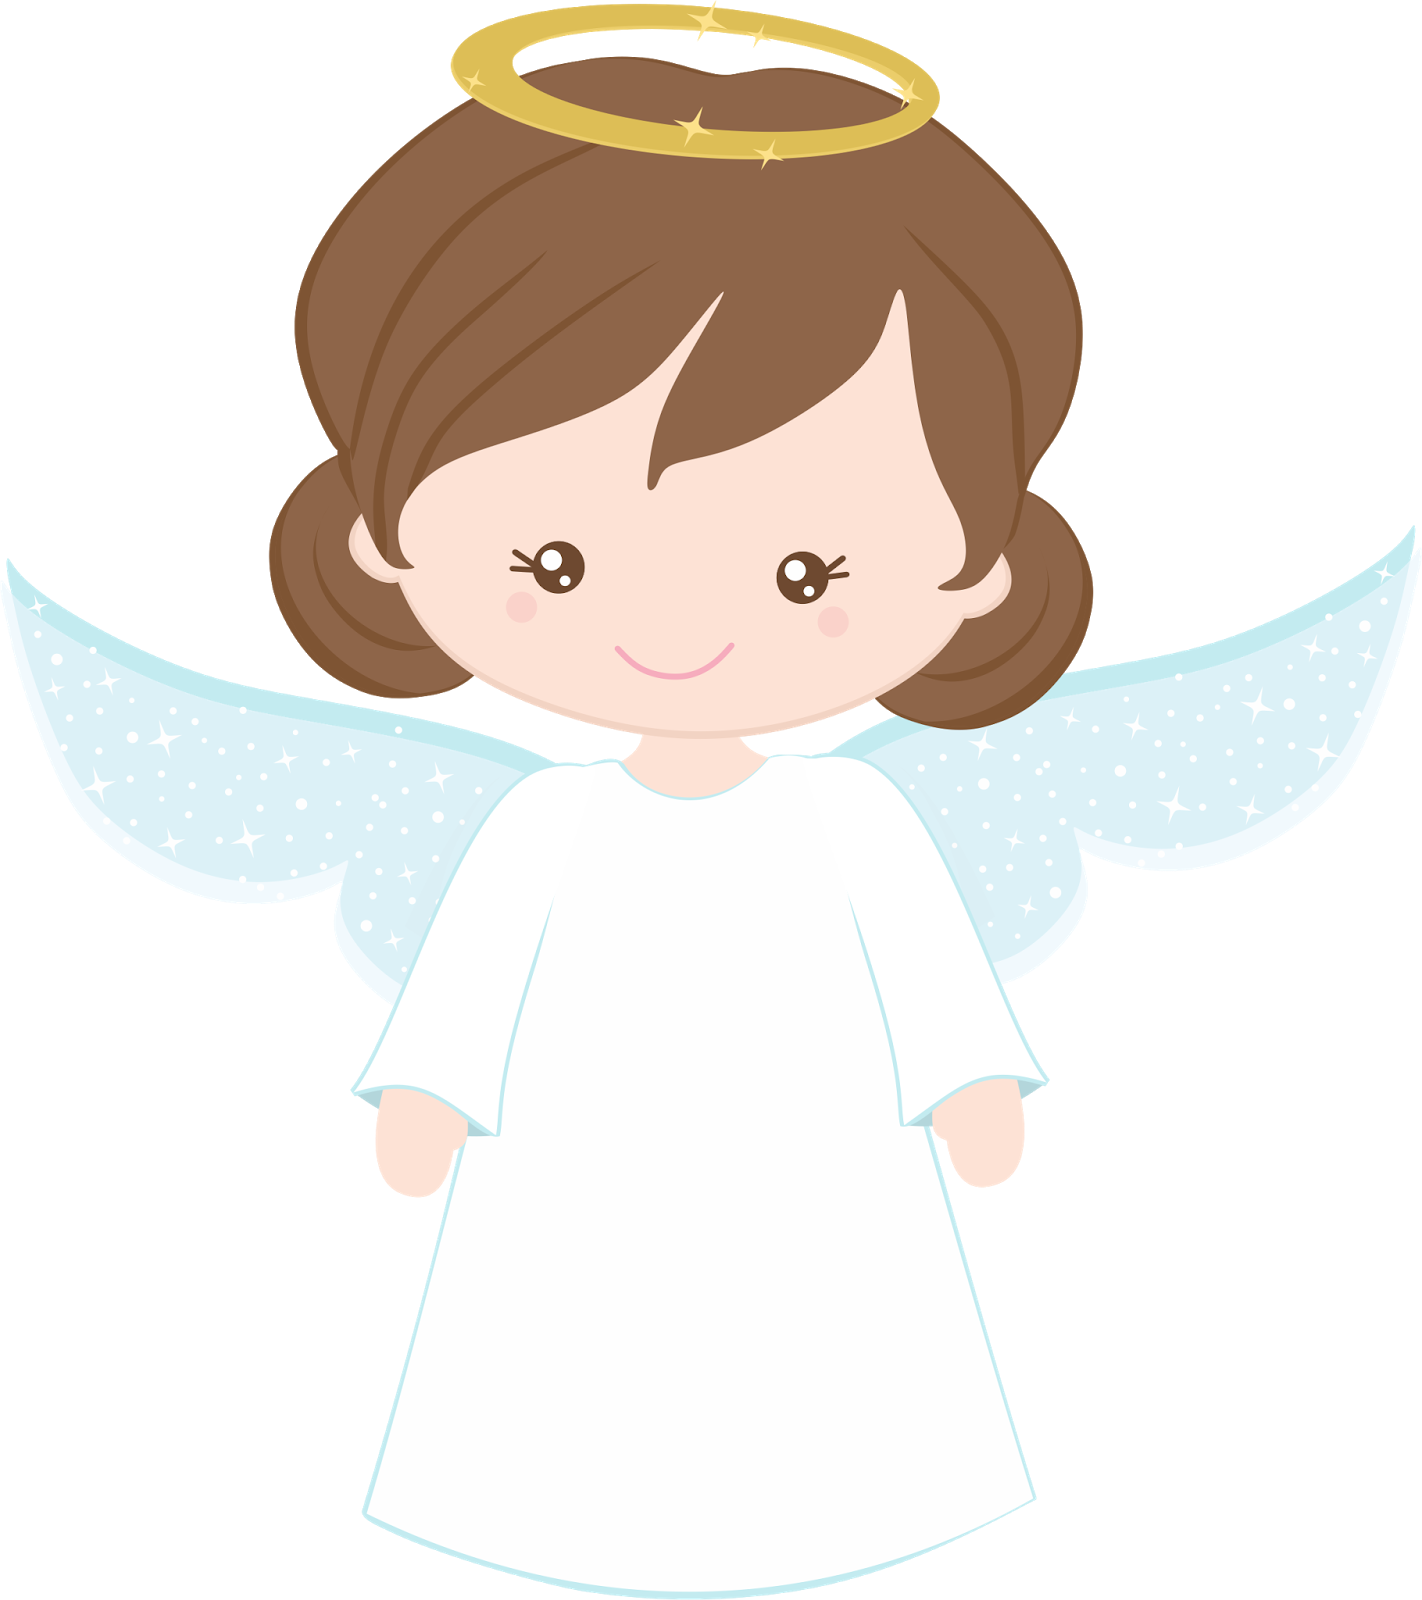 Pin by jana moraes. Clipart angel advent